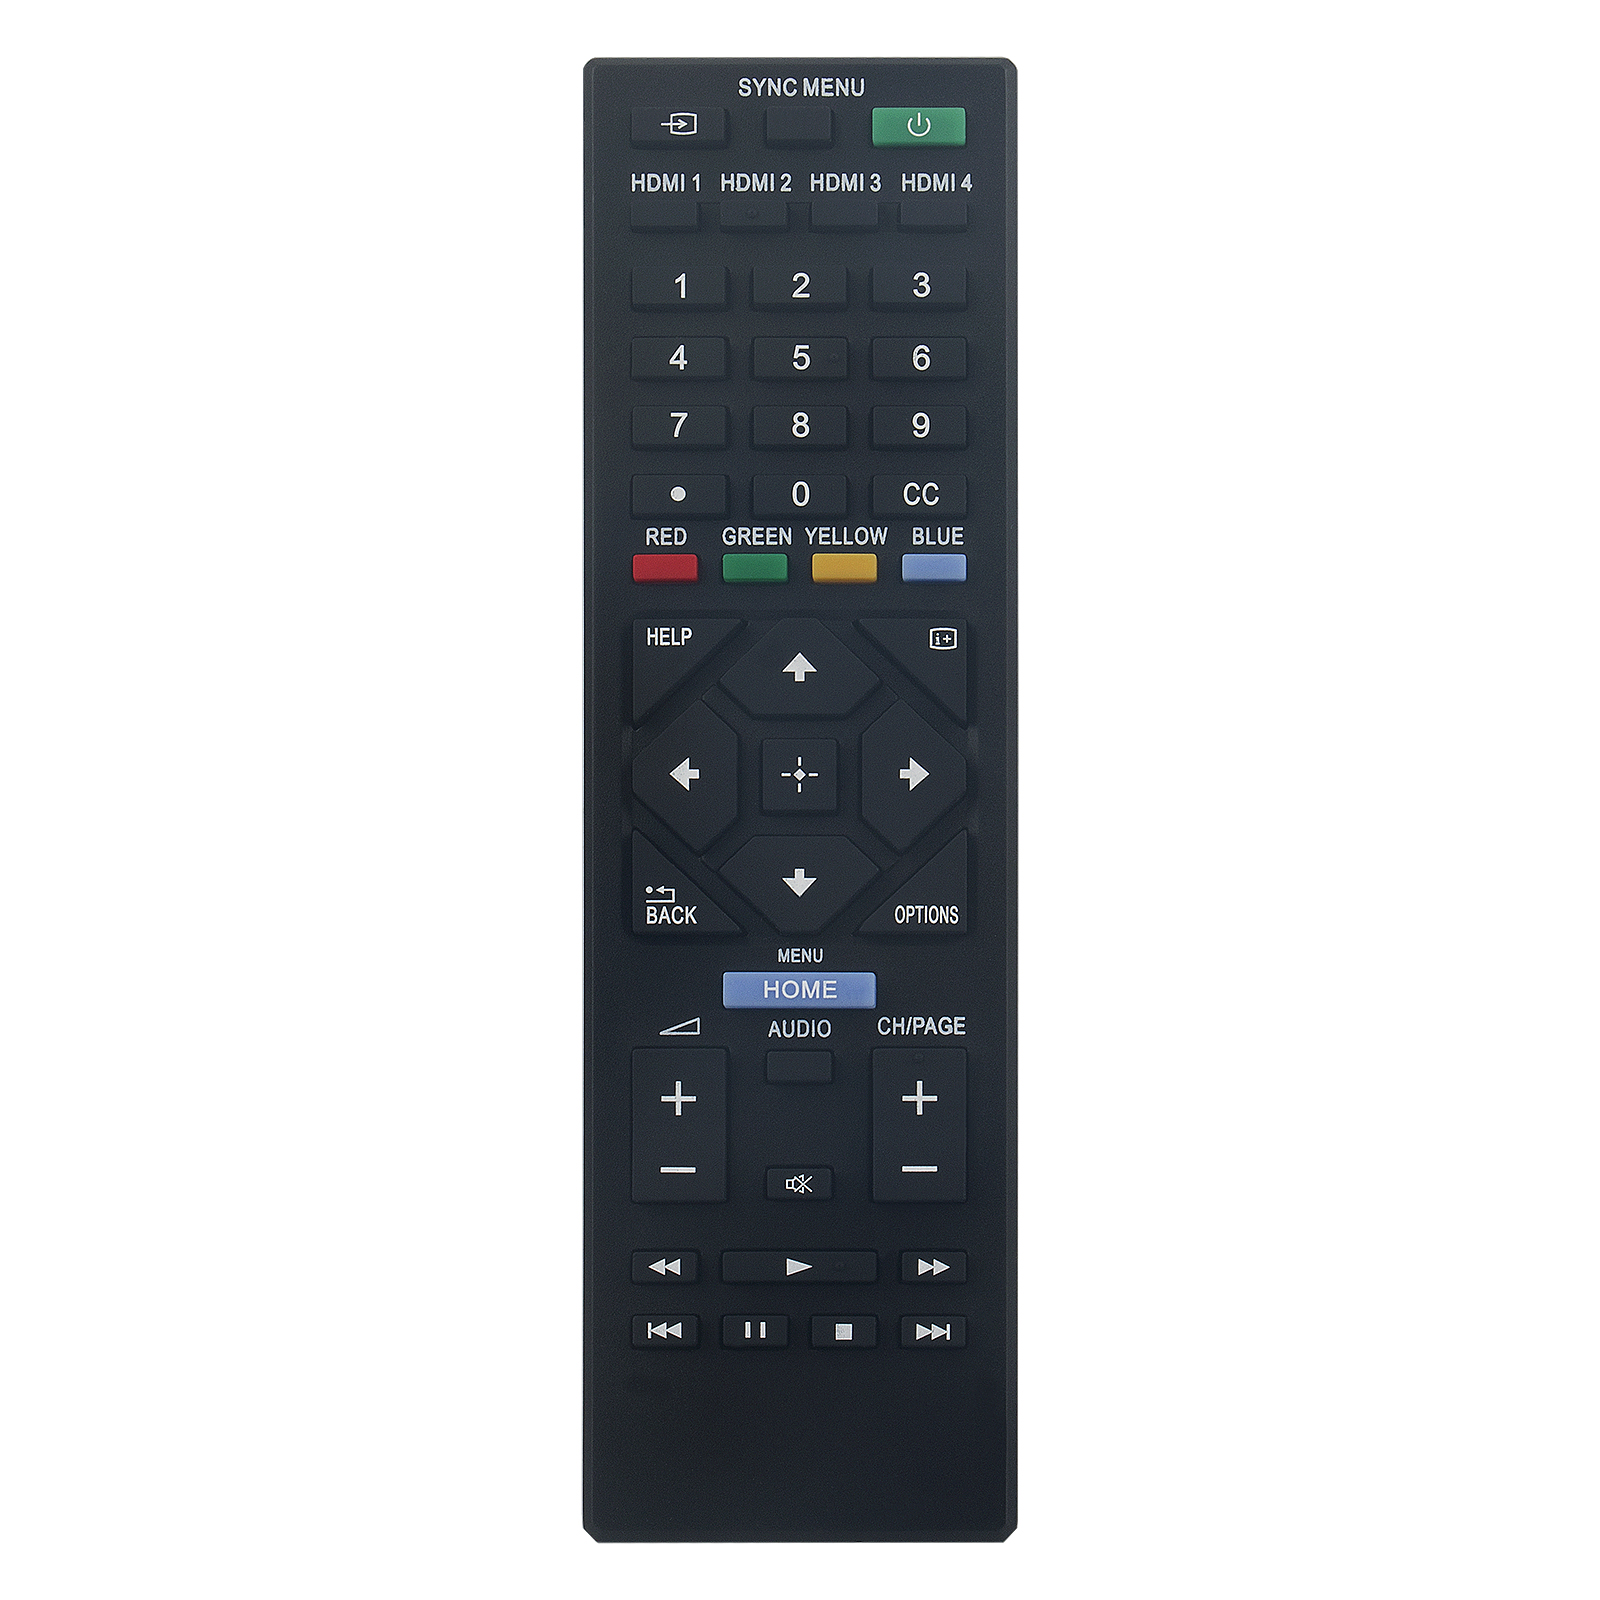 New RMT-TB400U replace remote control fit for SONY TV BRAVIA 4K FW75BZ35F FW-55BZ35F FW-65BZ35F FW-75BZ35F FW-85BZ35F FW65BZ35F W85BZ35F - image 1 of 2